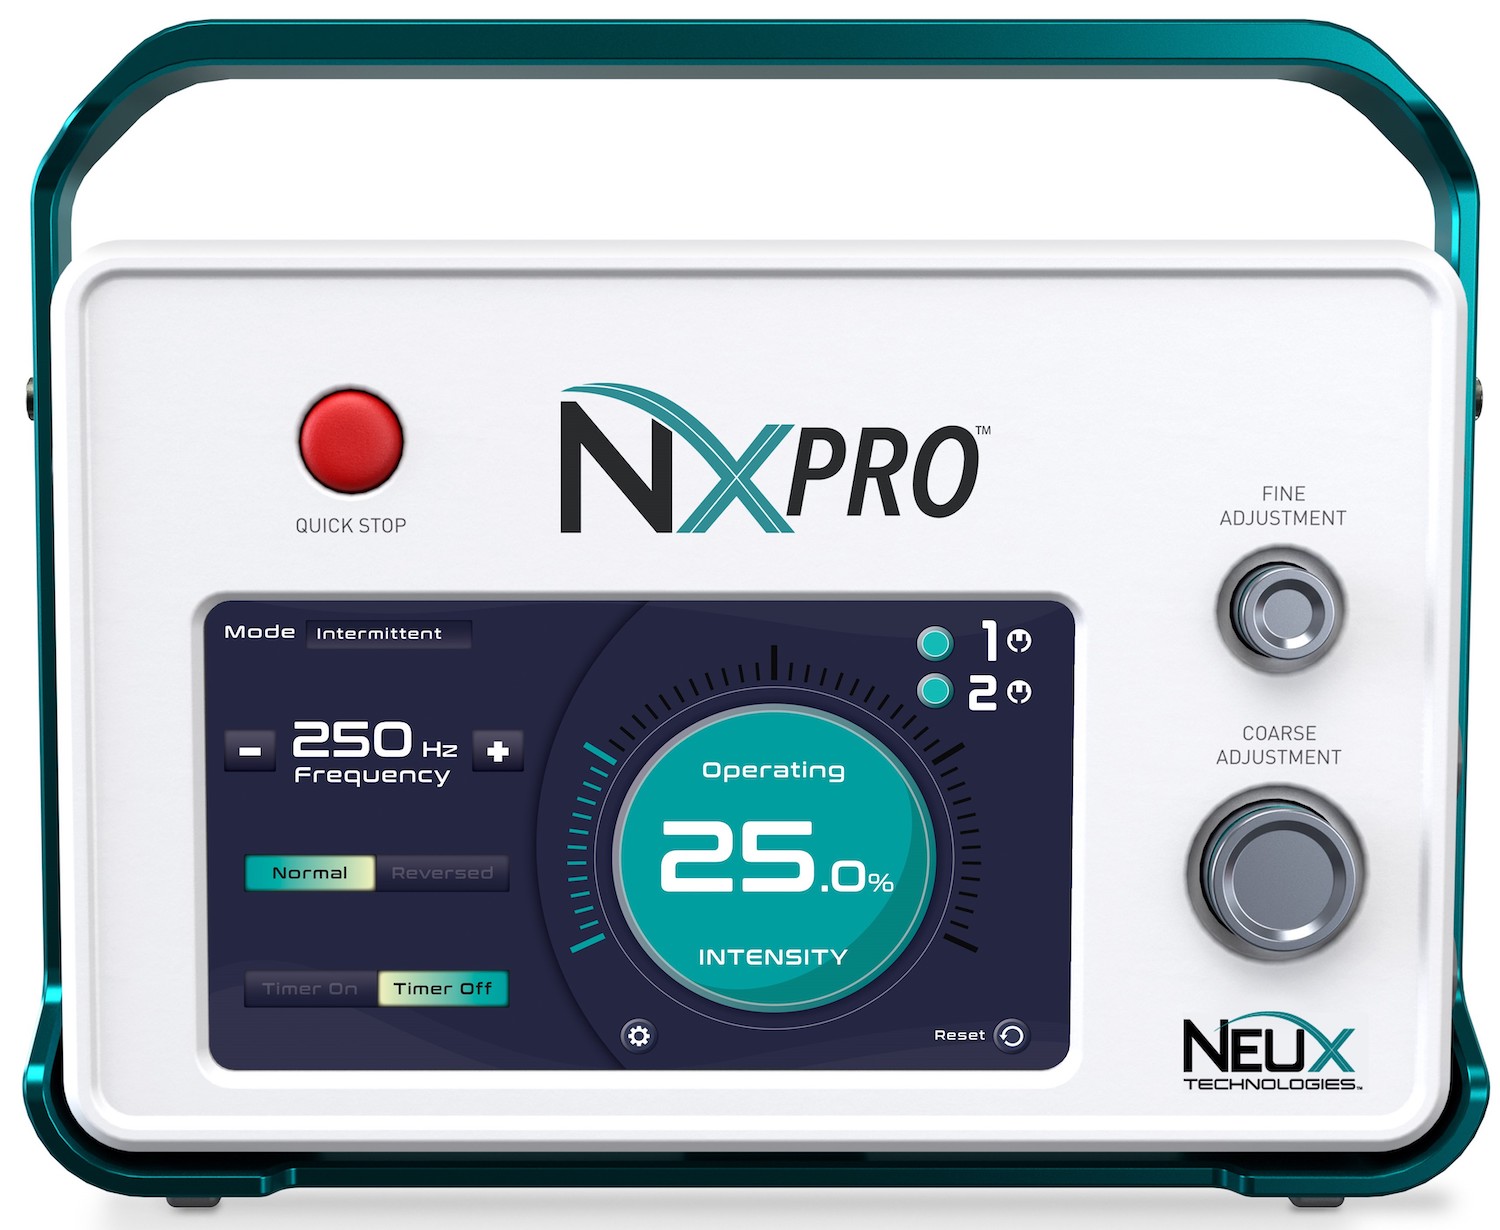 nxpro-handle-folded-with-logo-cropped-final